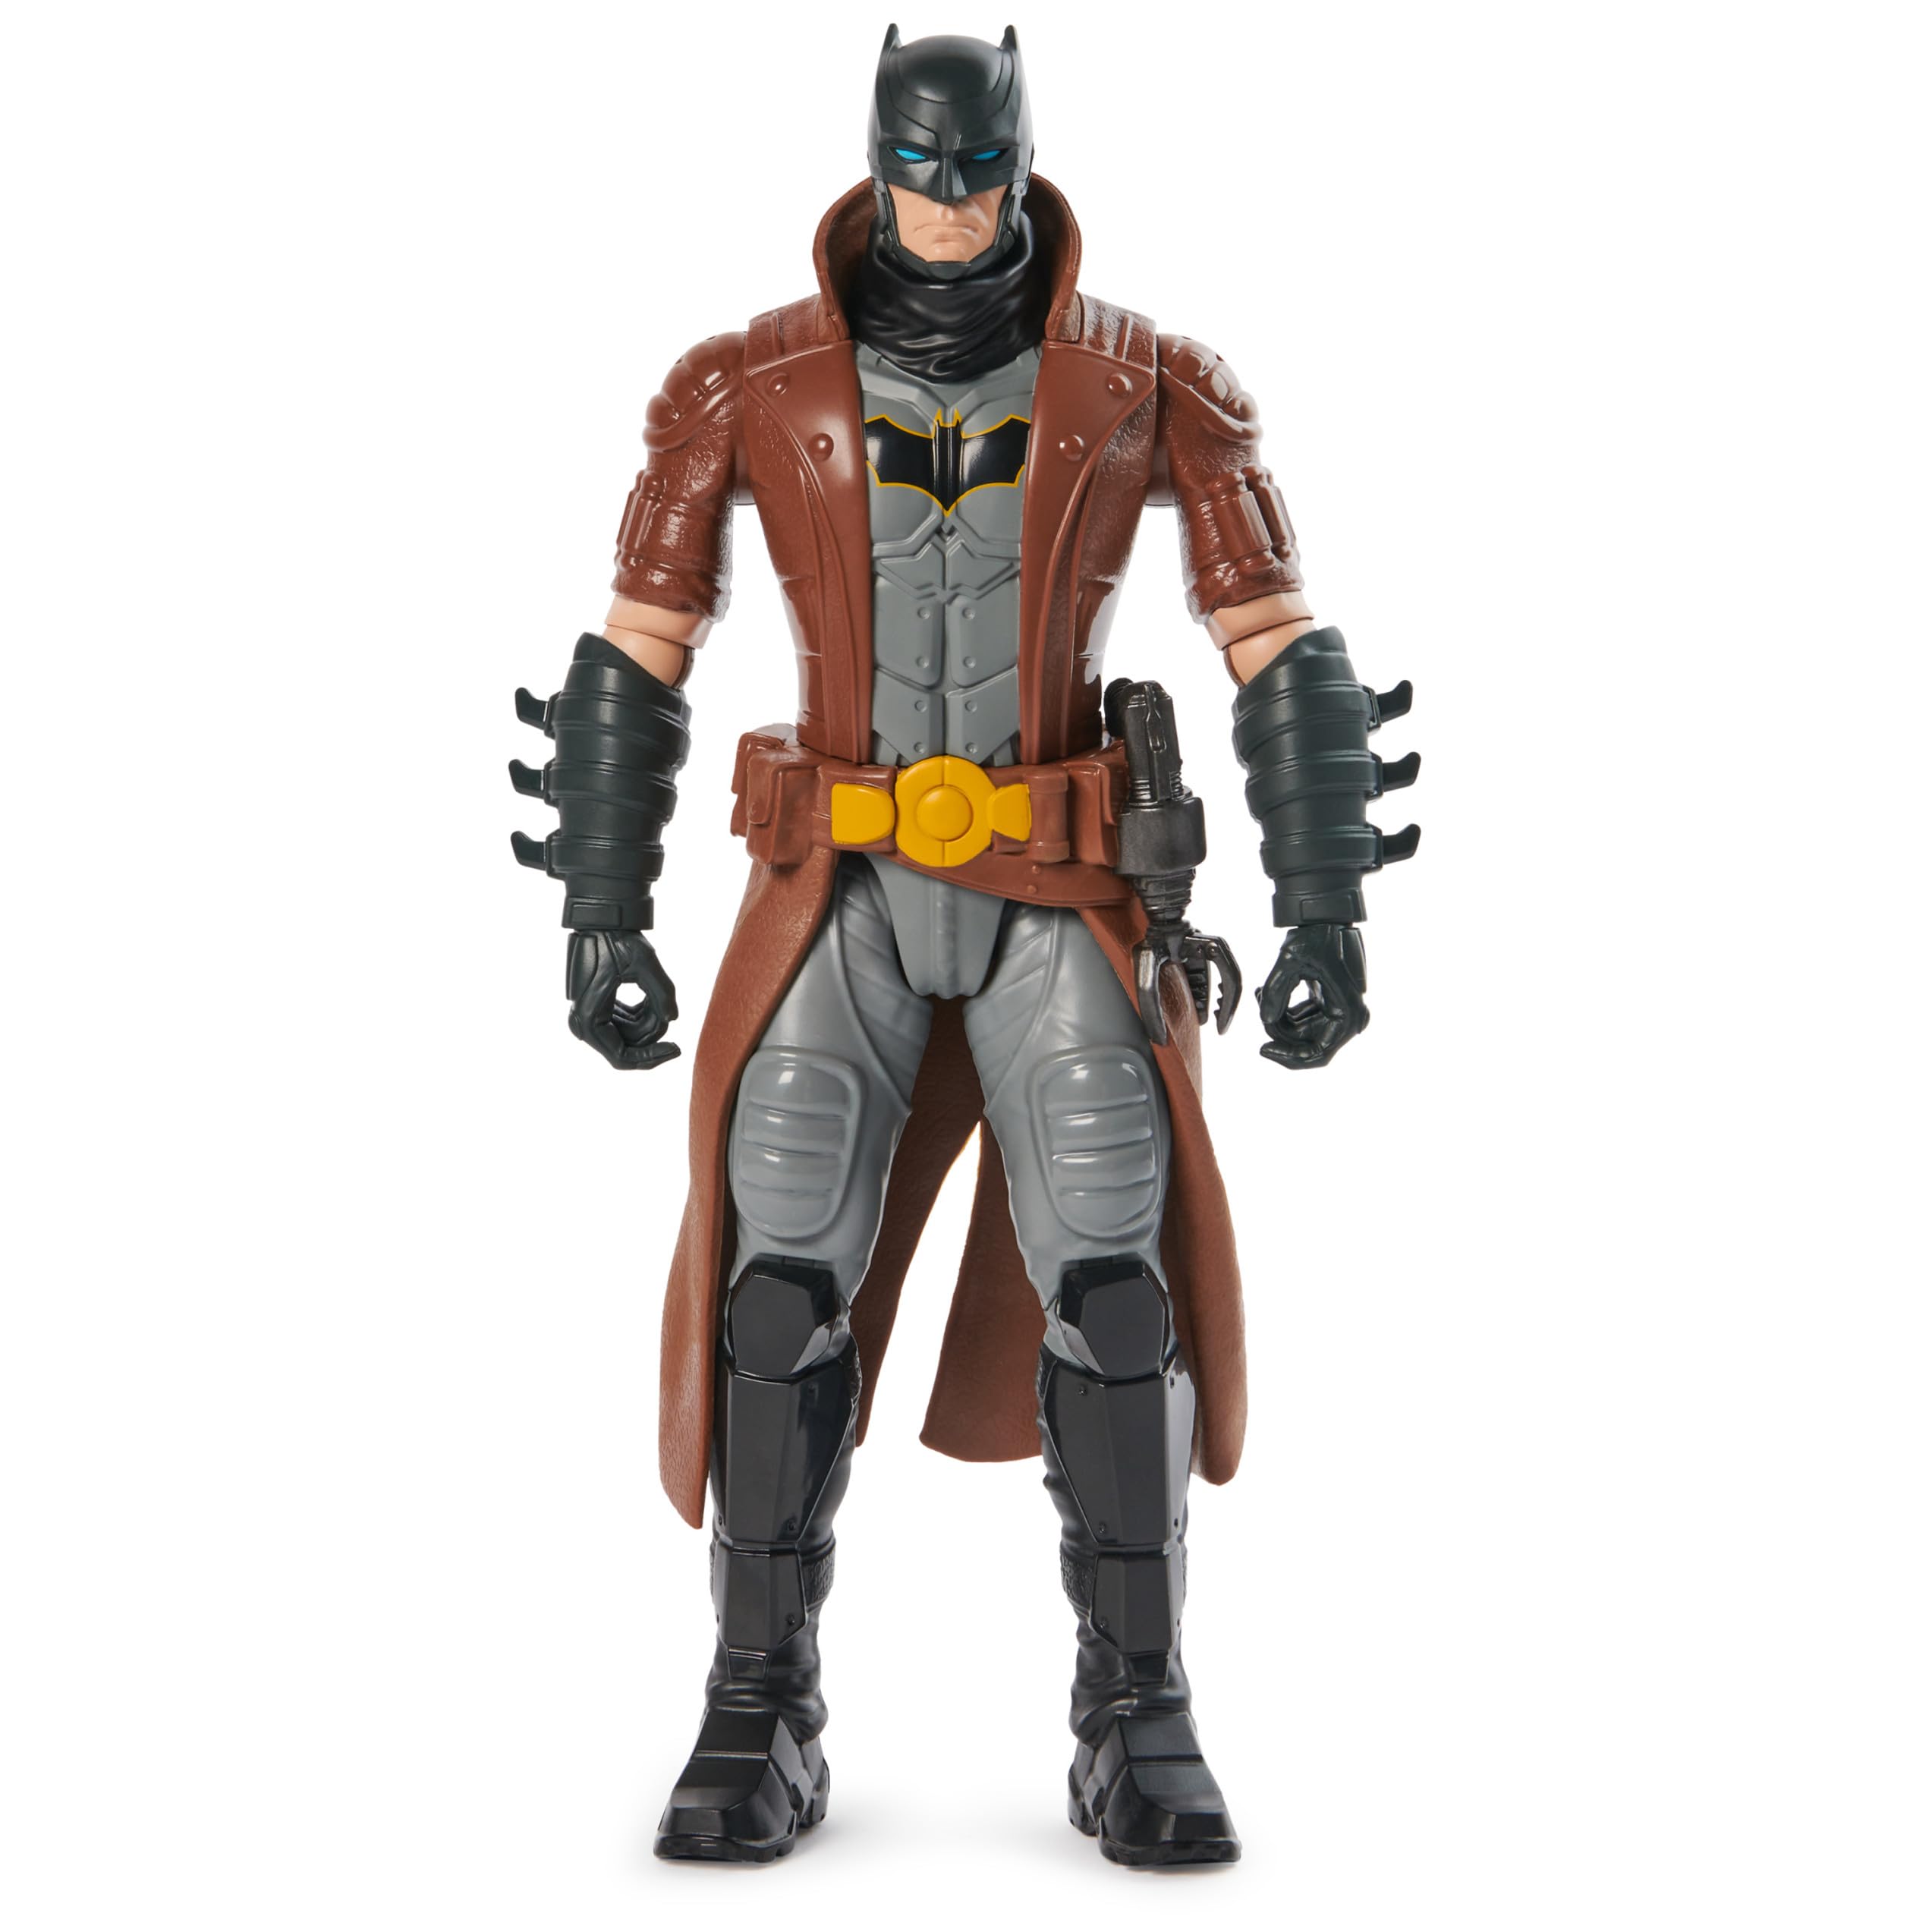 12" DC Comics Batman Action Figure (Brown) $5.40 + Free Shipping w/ Prime or on orders over $35